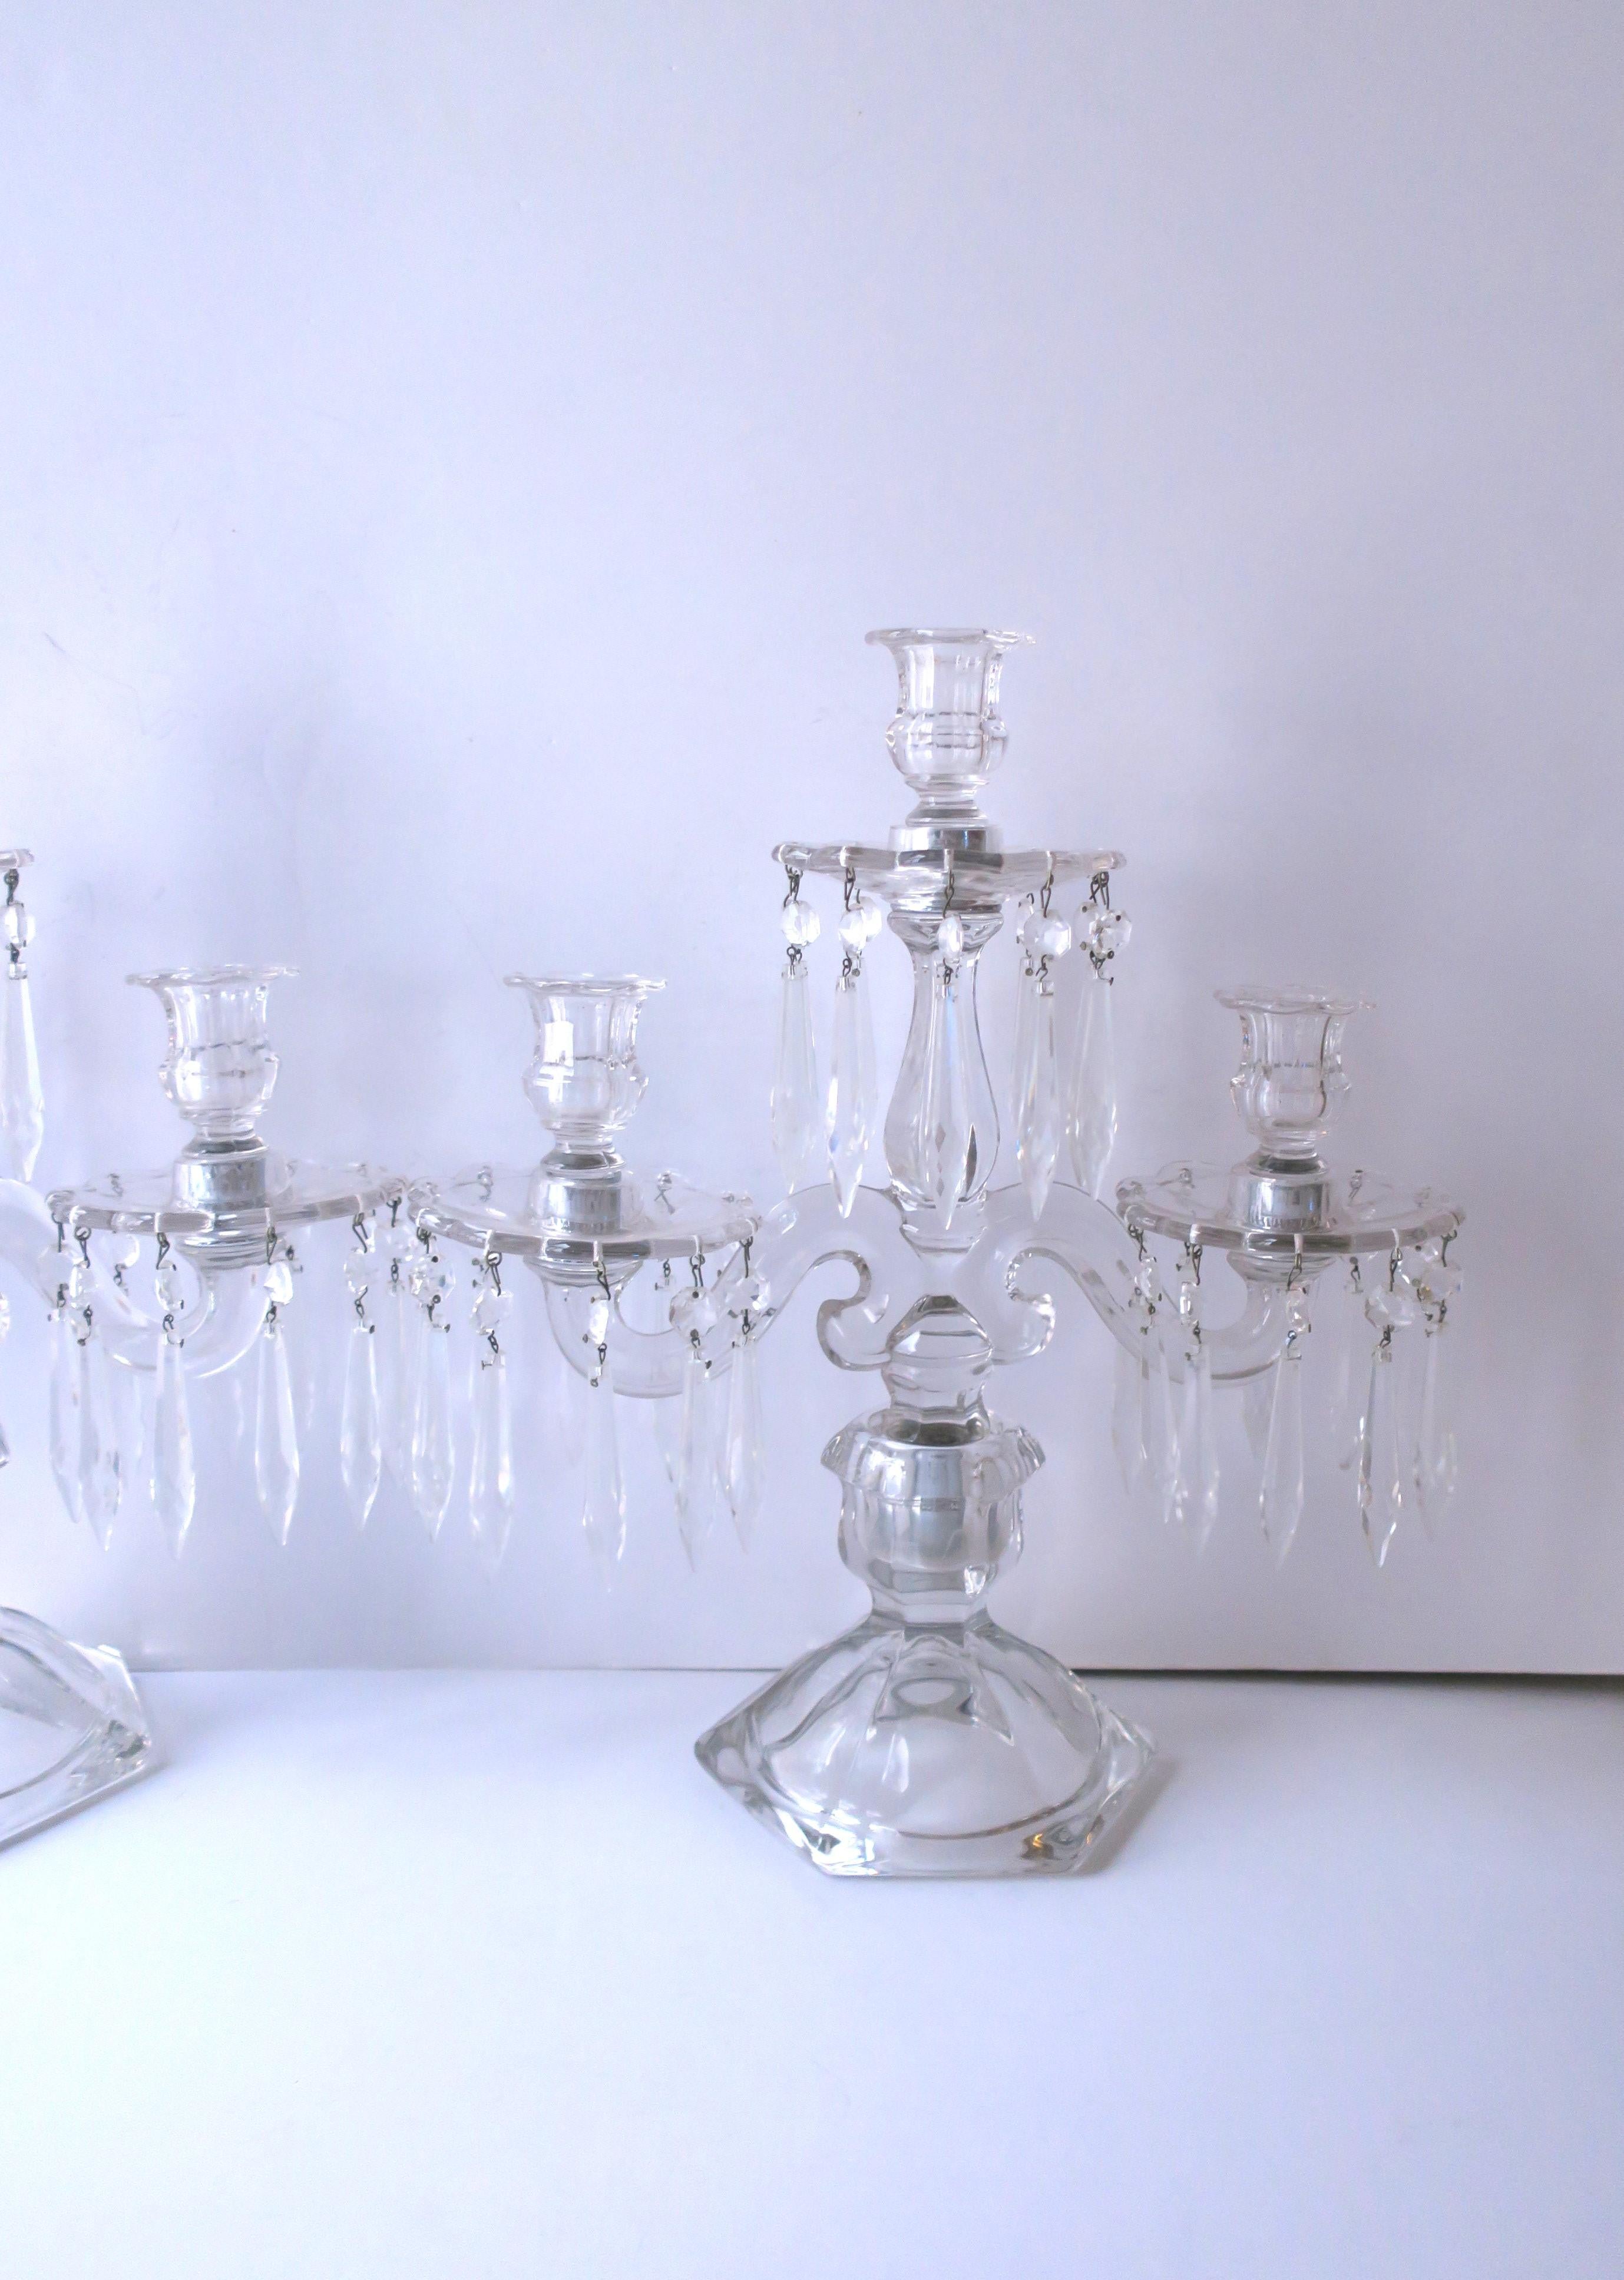 20th Century Crystal and Glass Candlesticks Candelabras, Pair For Sale